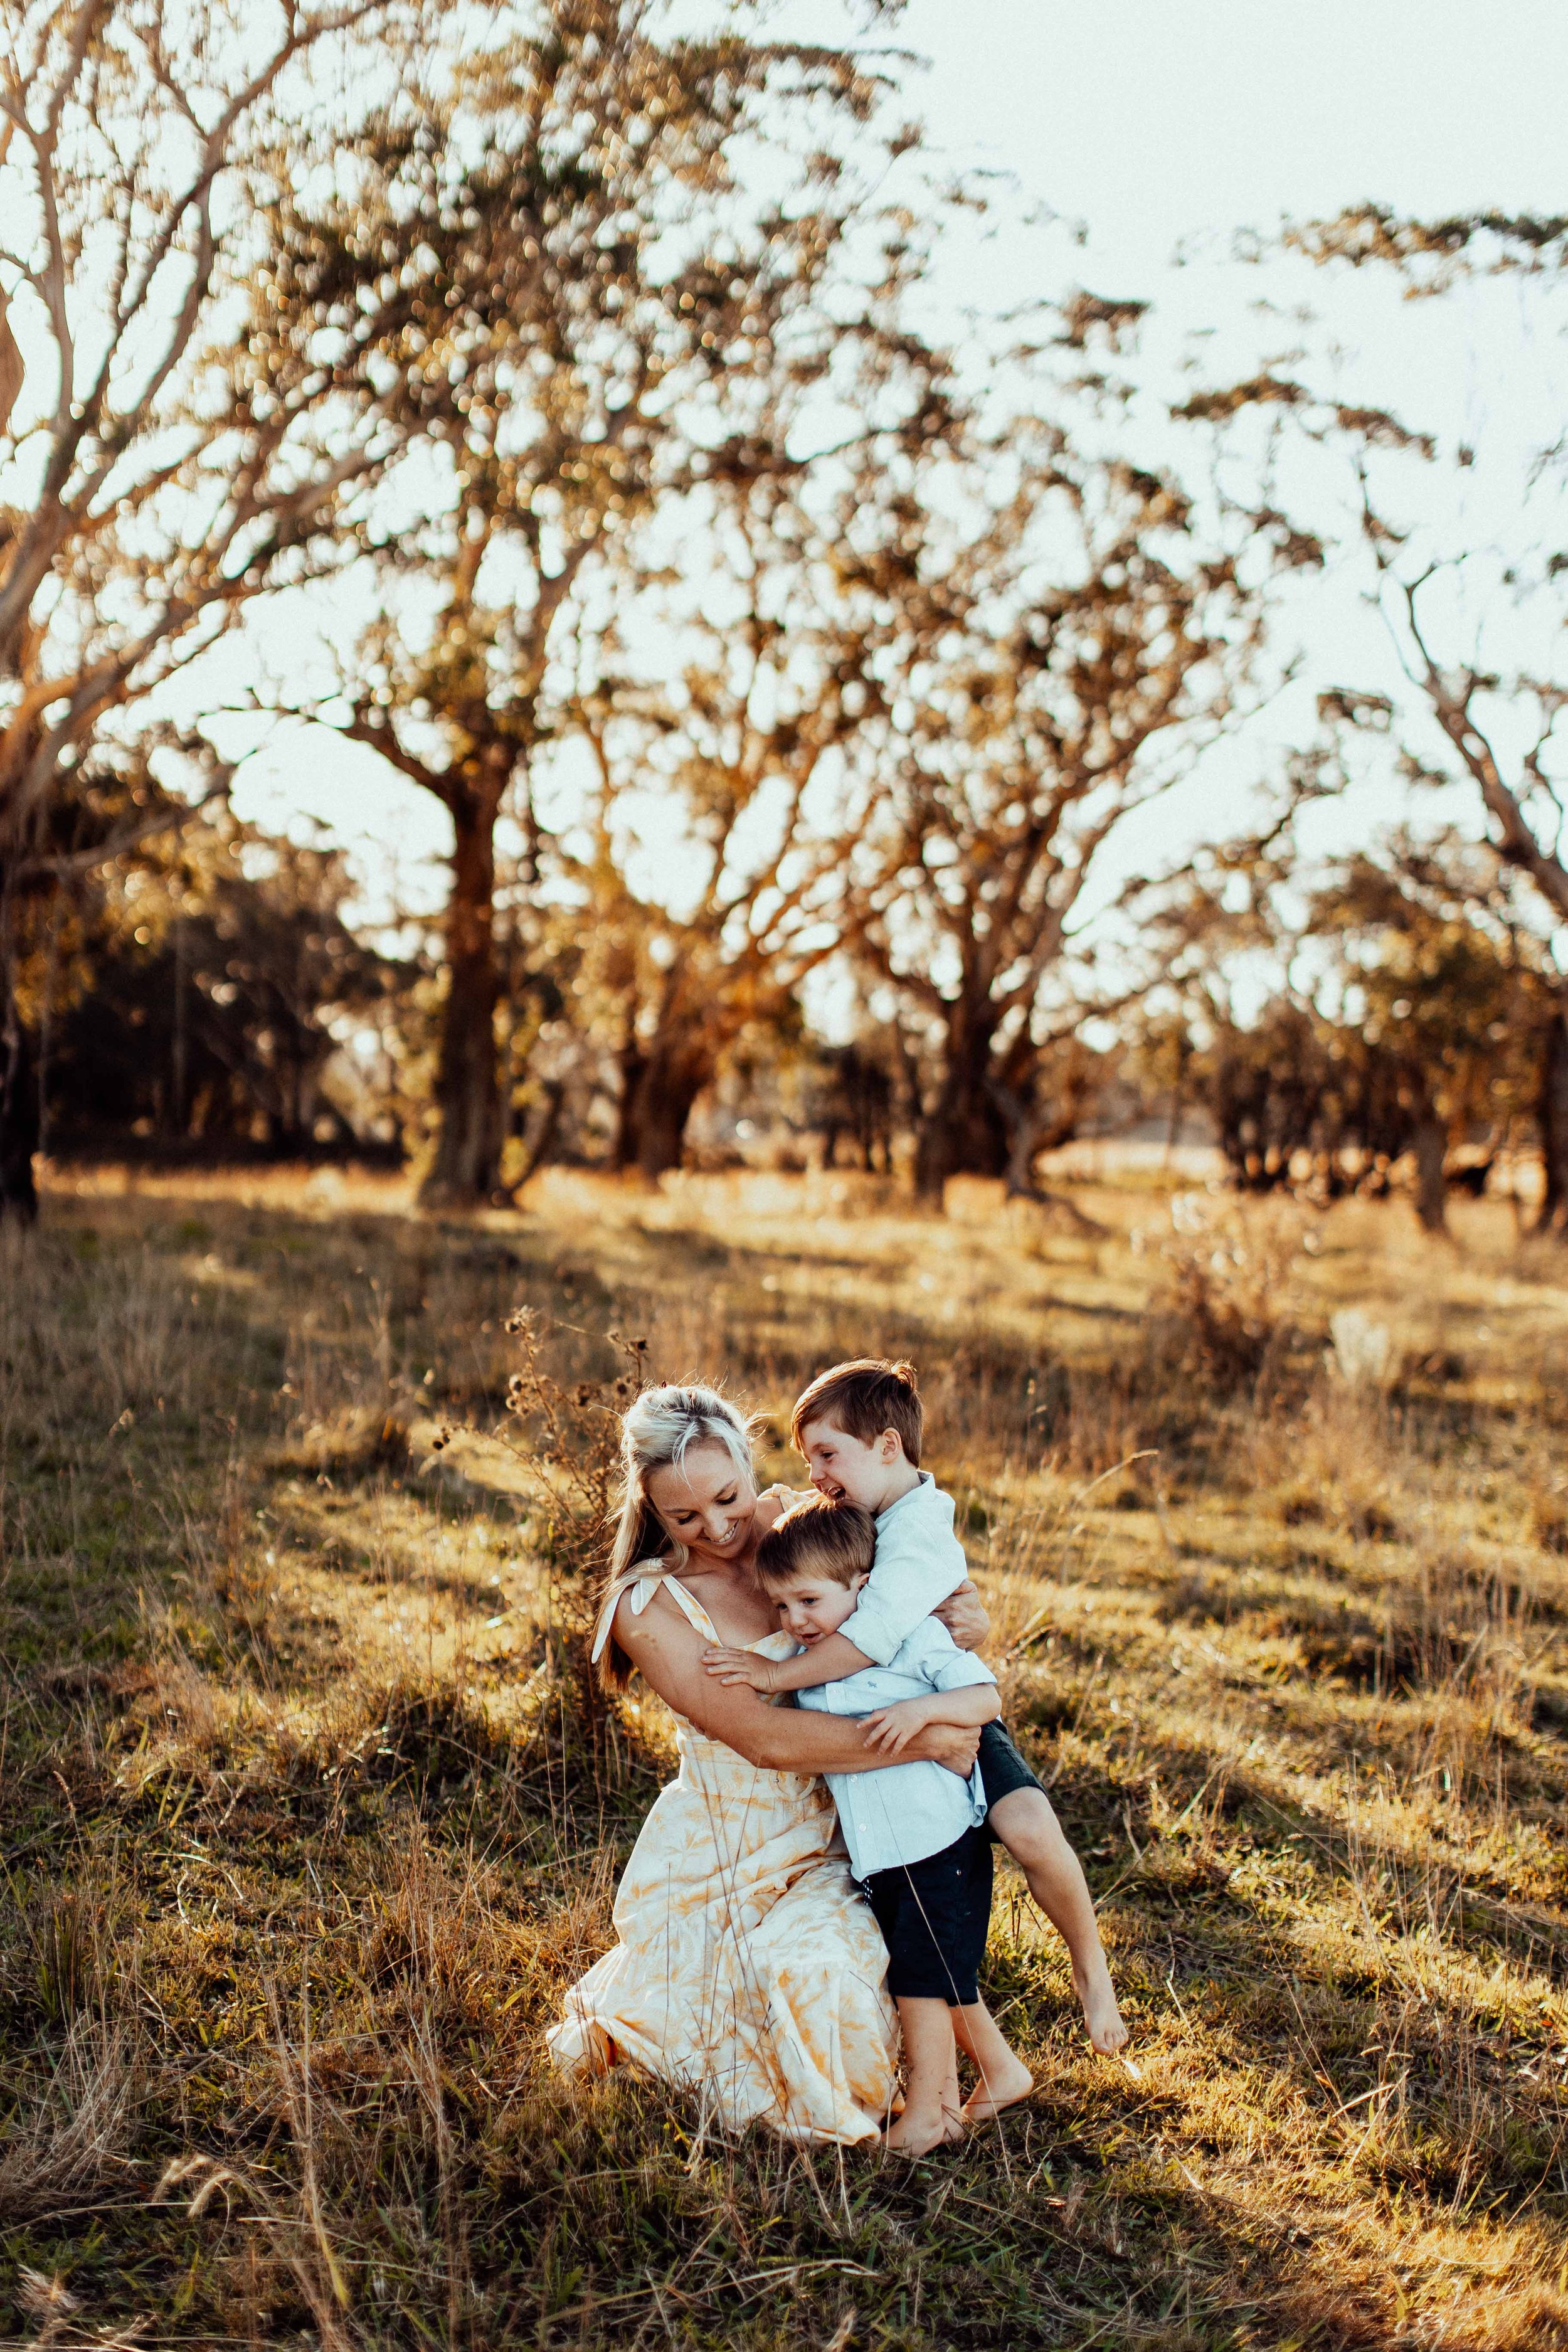 durney-family-exeter-southern-highlands-bowral-inhome-family-lifestyle-wollondilly-camden-macarthur-sydney-photography-www.emilyobrienphotography.net-52.jpg